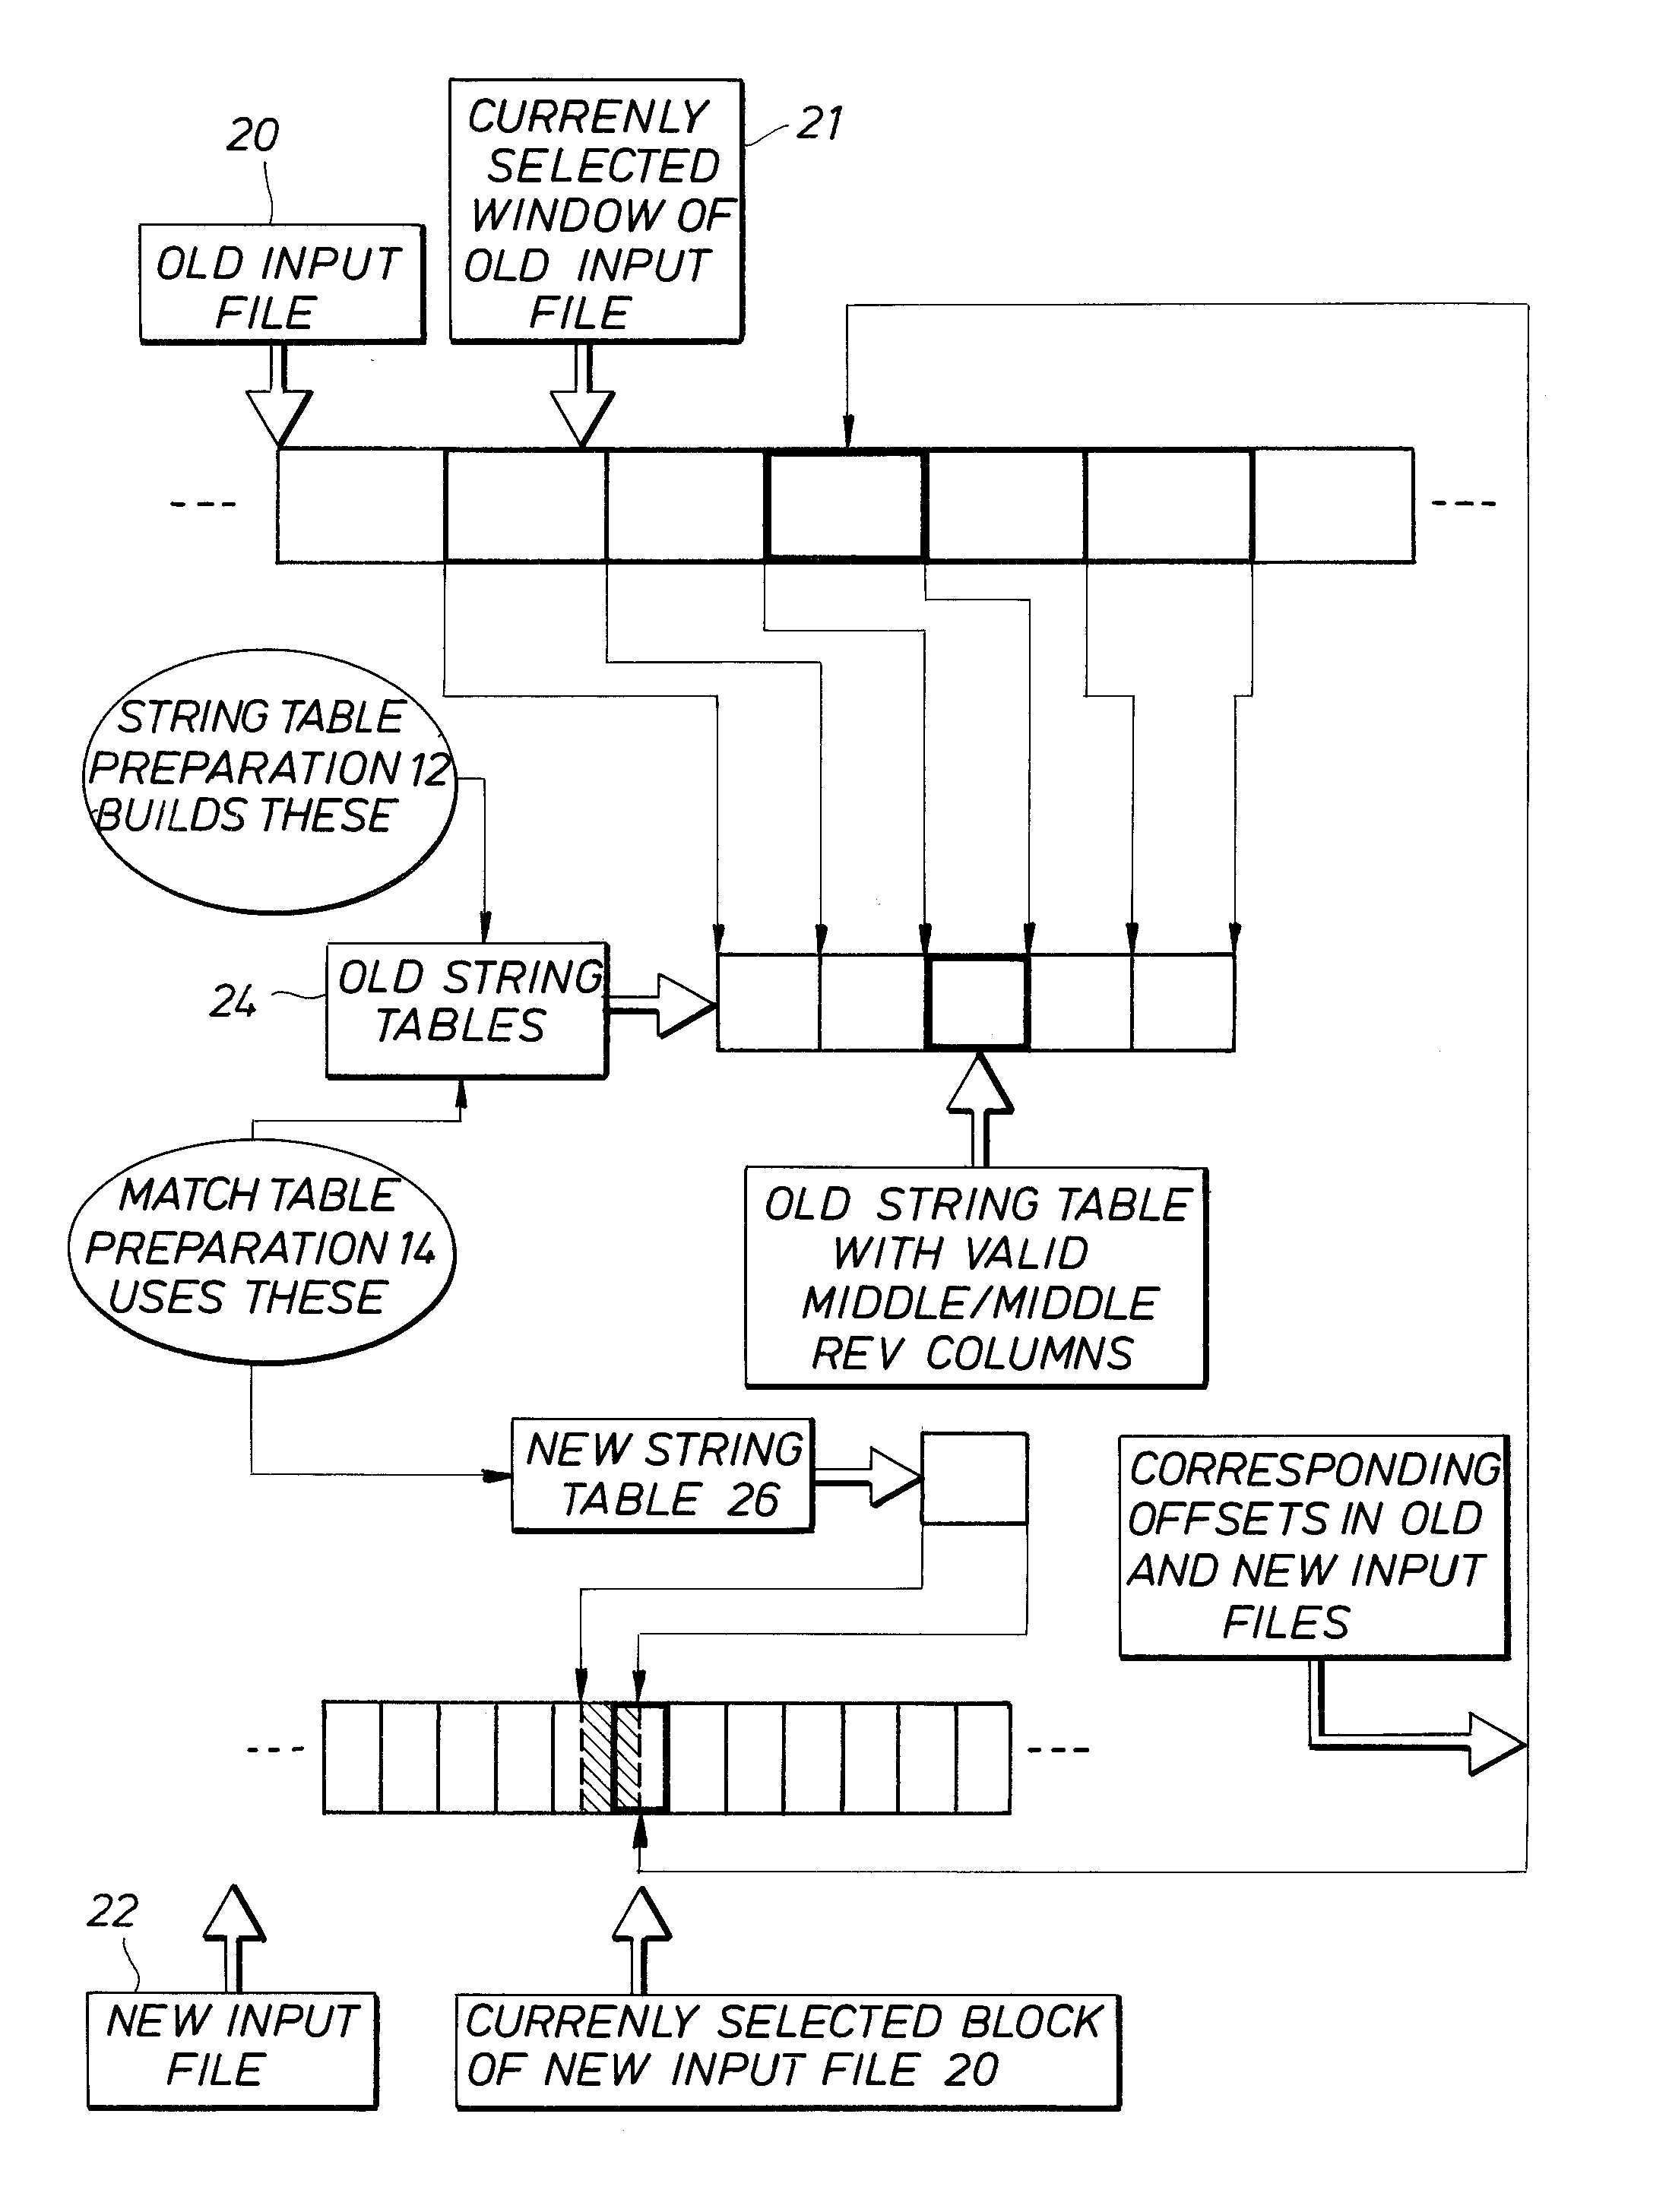 Method and apparatus for finding differences between two computer files efficiently in linear time and for using these differences to update computer files